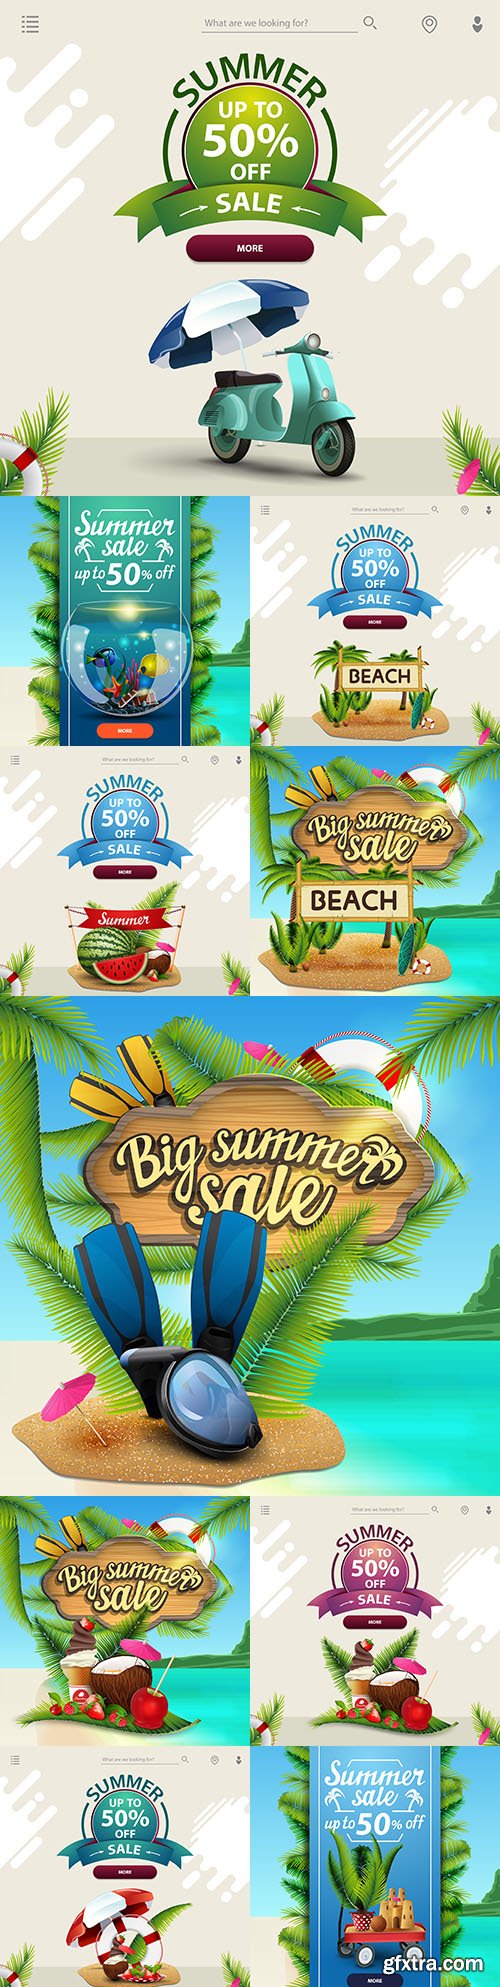 Summer sale and discount template for your business
